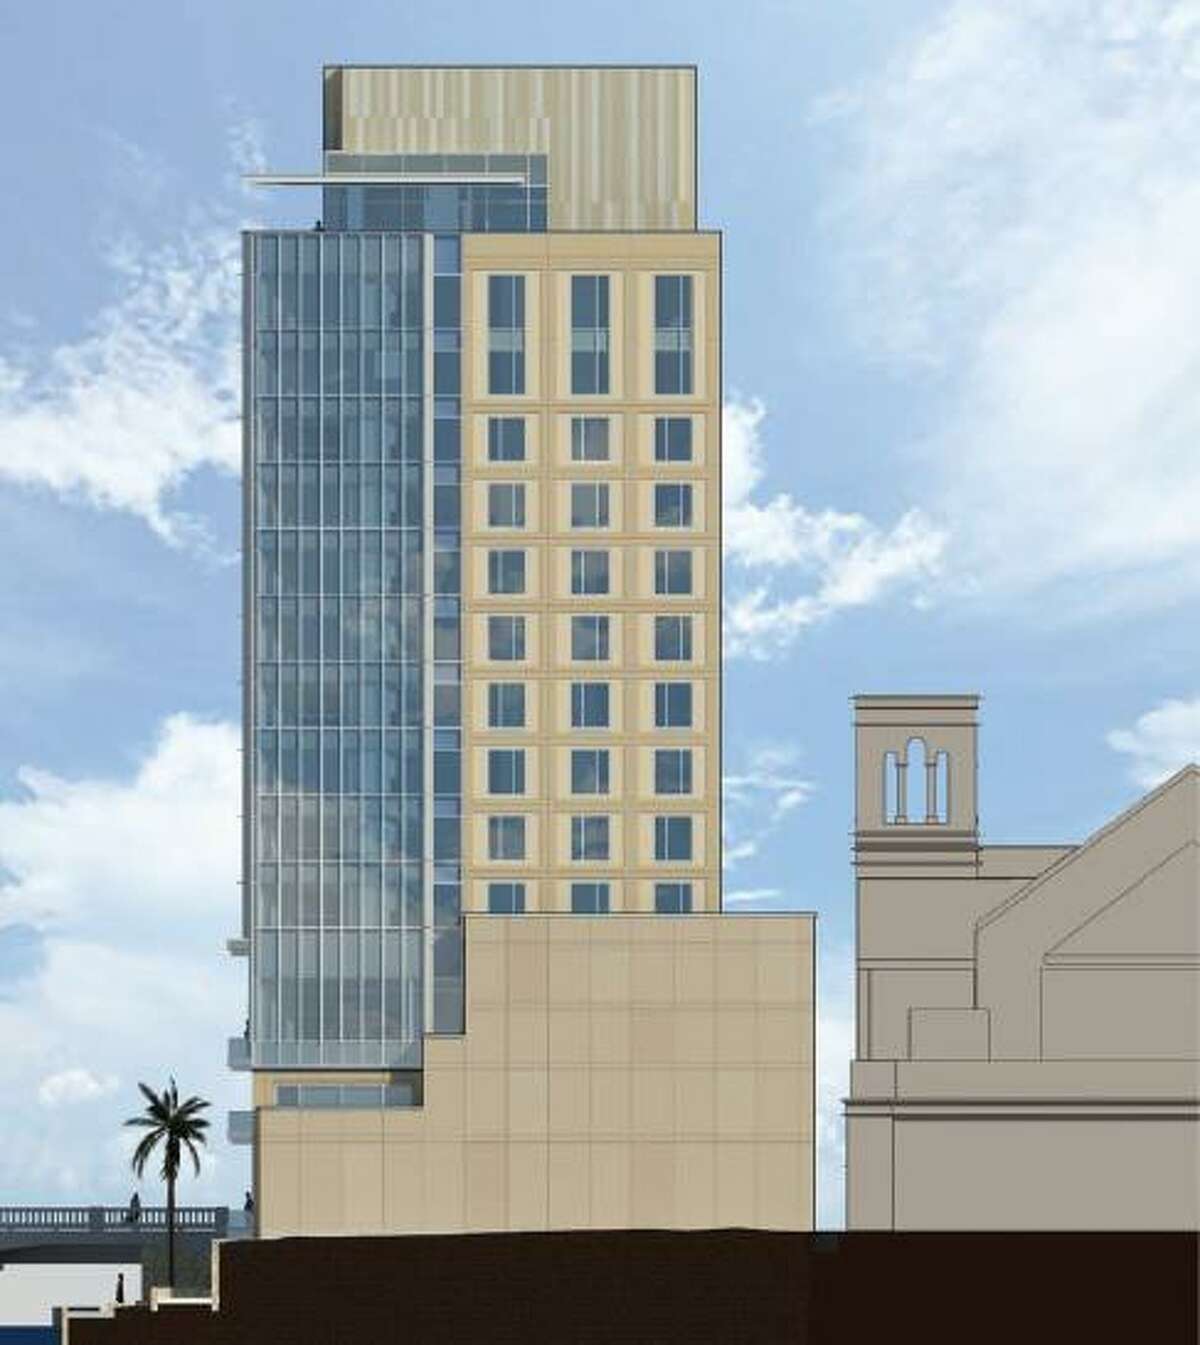 SMS-SAR Hospitality, LLC is proposing building a 14-story hotel near St. Mary's Catholic Church in downtown San Antonio.